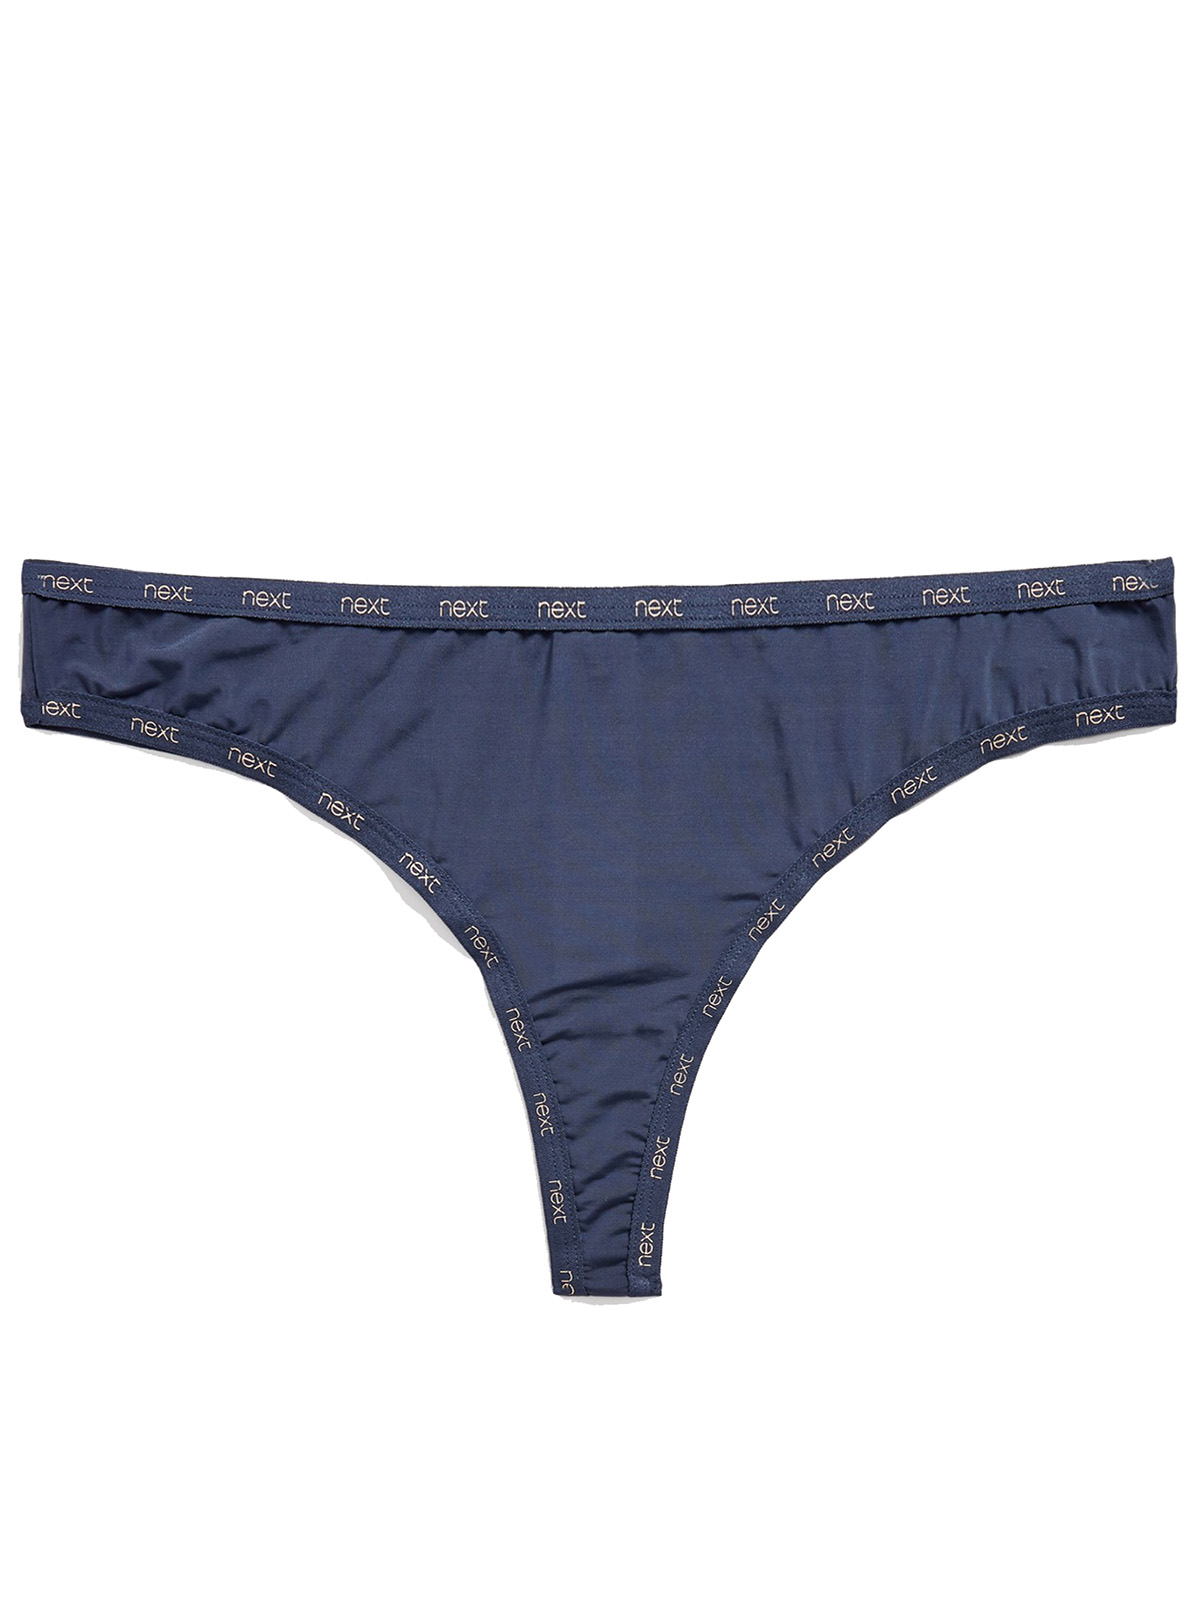 NAVY Branded Trim Thong - Size 6 to 22